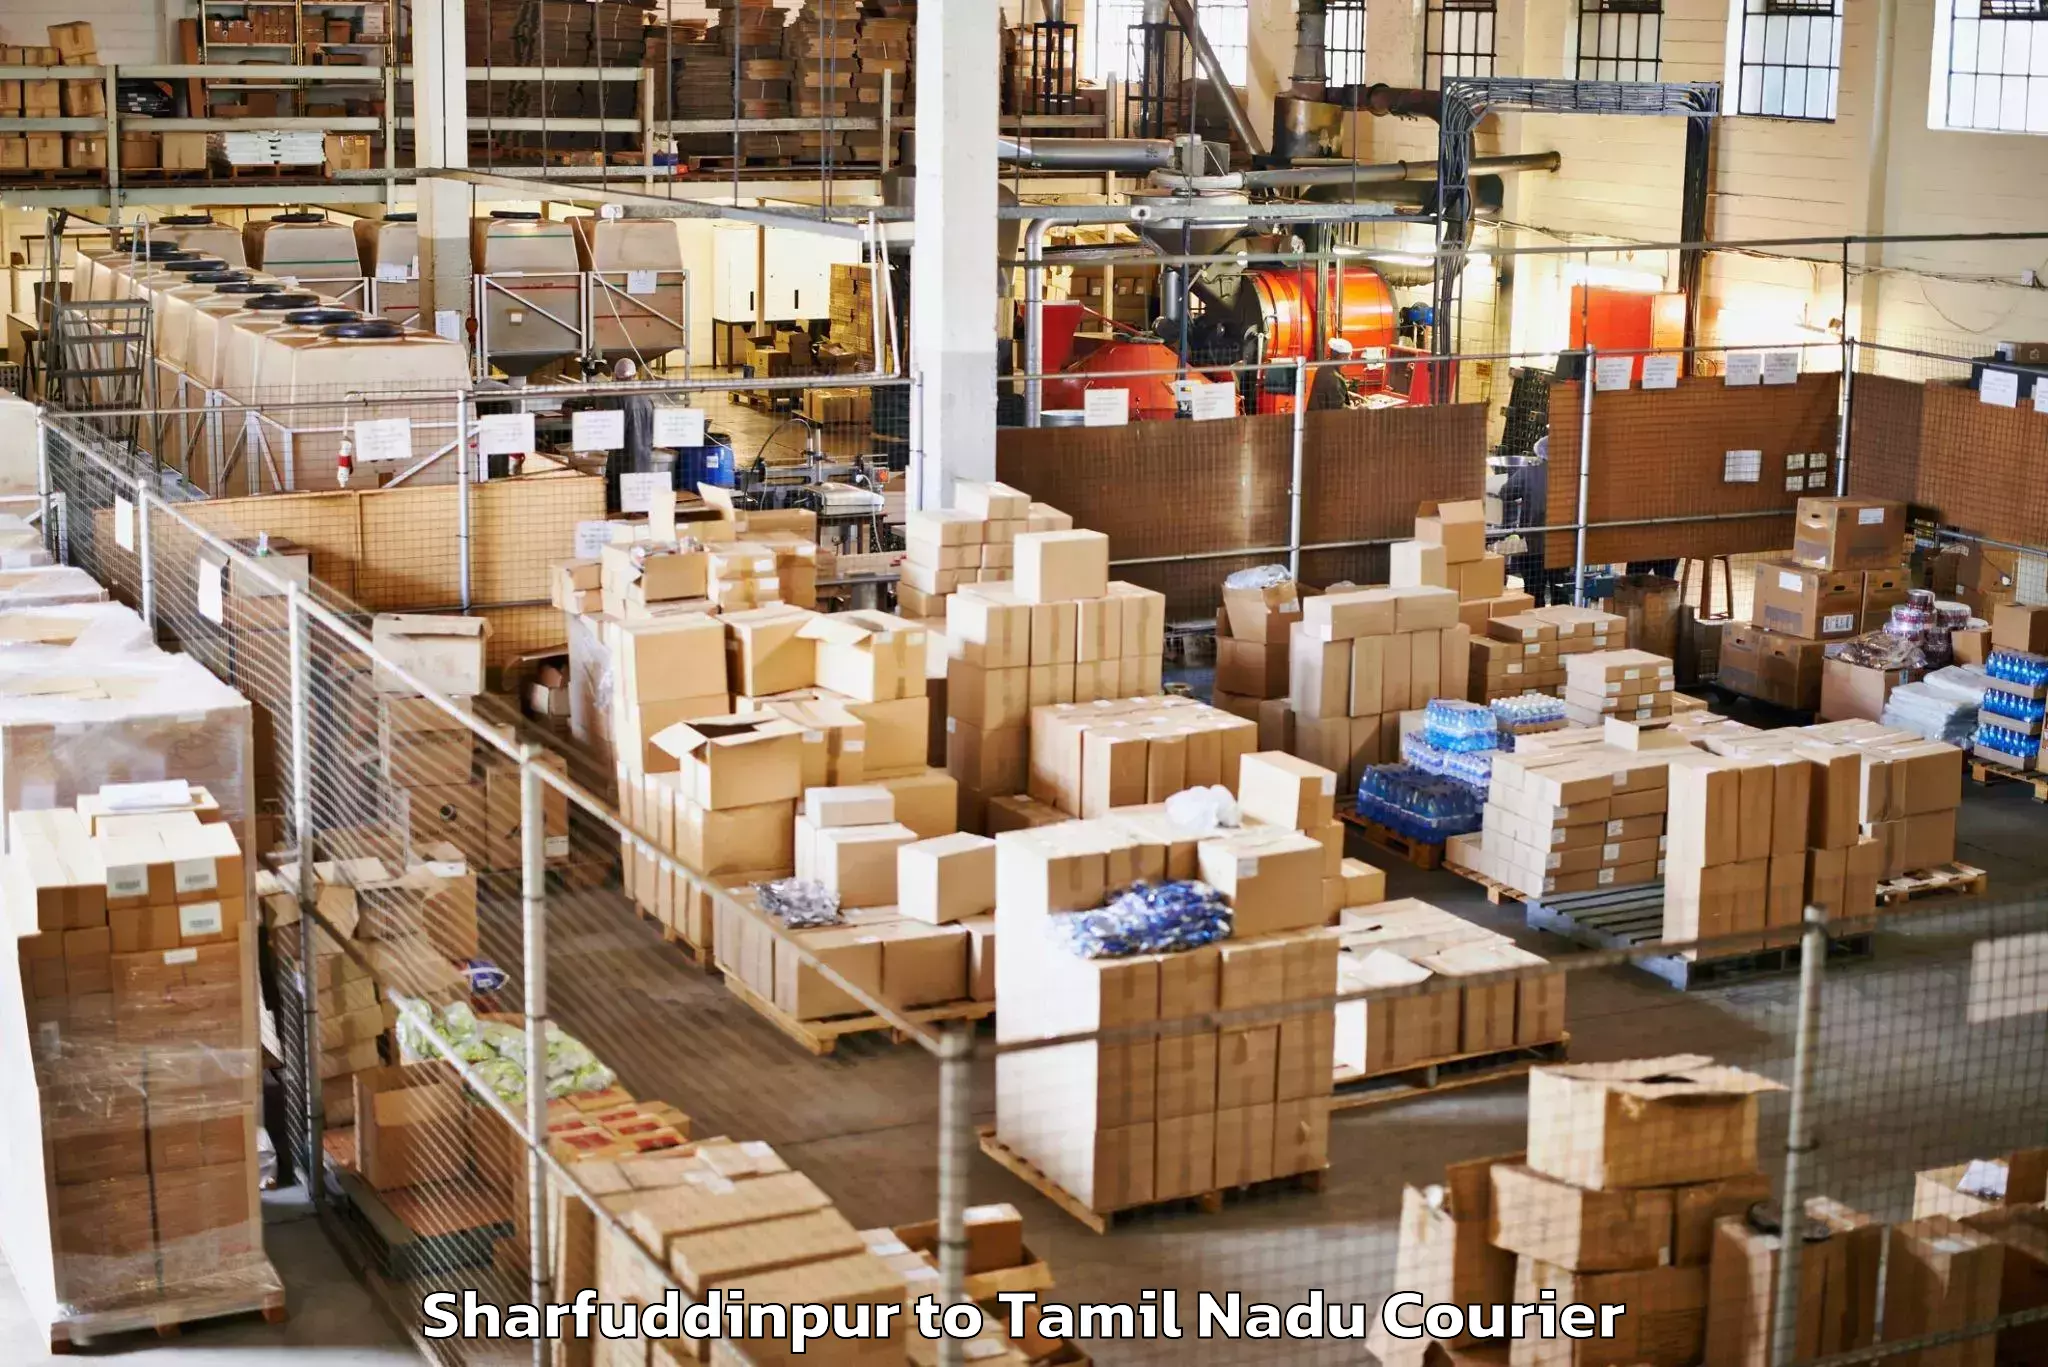 Luggage shipping guide in Sharfuddinpur to Coonoor